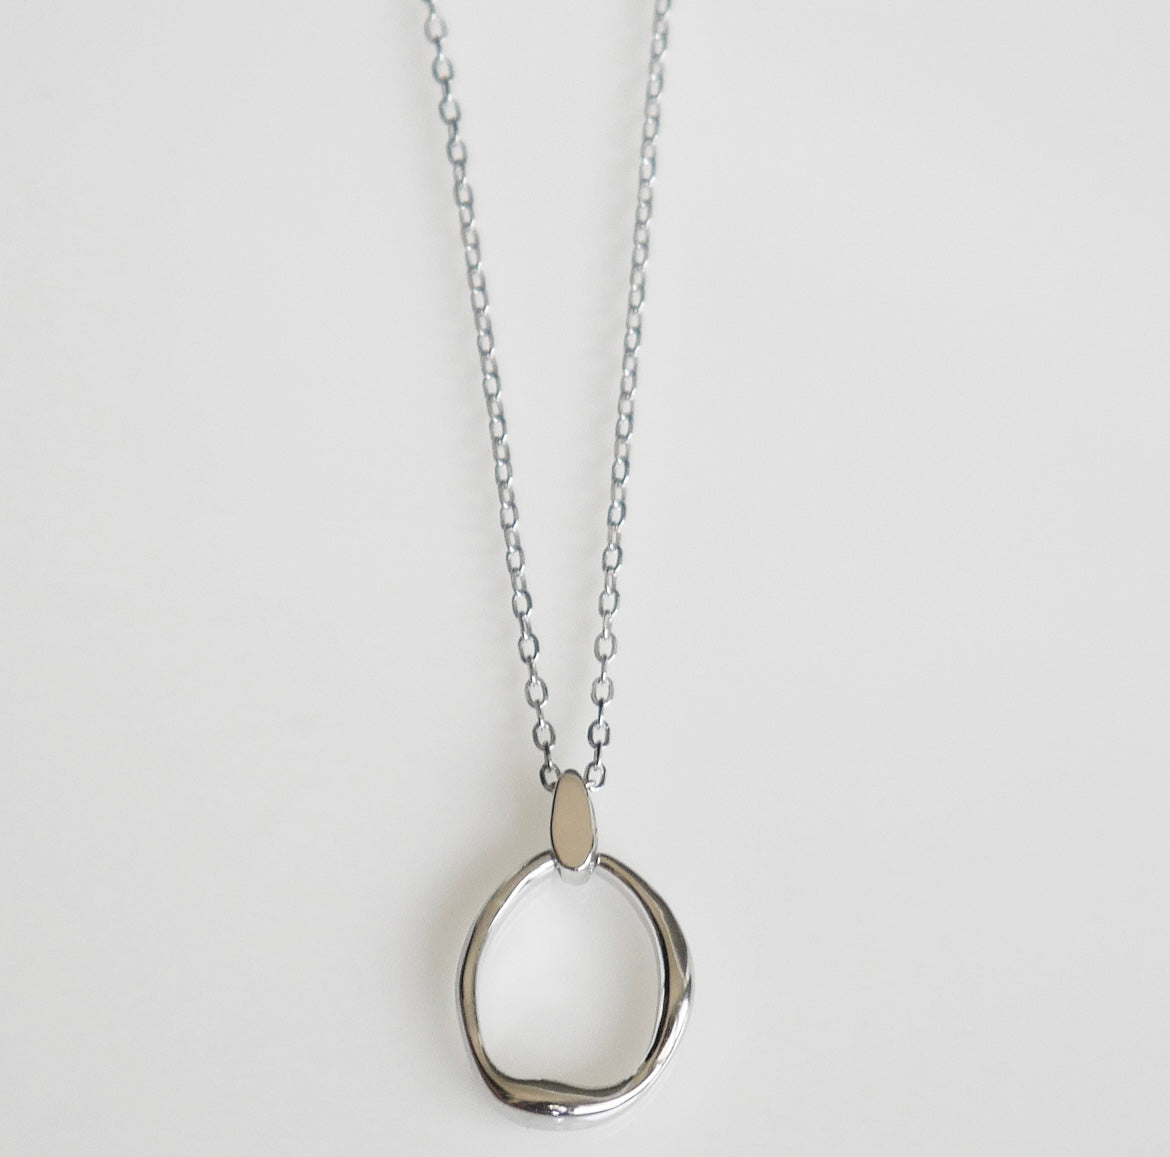 necklace, silver necklaces, circle necklaces, sterling silver circle necklace, tiffanys jewelry, tiffanys style necklaces, tarnish free necklaces, new jewelry styles, fashion jewelry, dainy necklaces, minimalist necklaces, necklaces that dont turn green with water, dainty jewelry, trending on tiktok, gifts, birthday gifts, anniversary gifts, kesley jewelry, silver necklaces, cheap necklaces, fine jewelry, designer jewelry